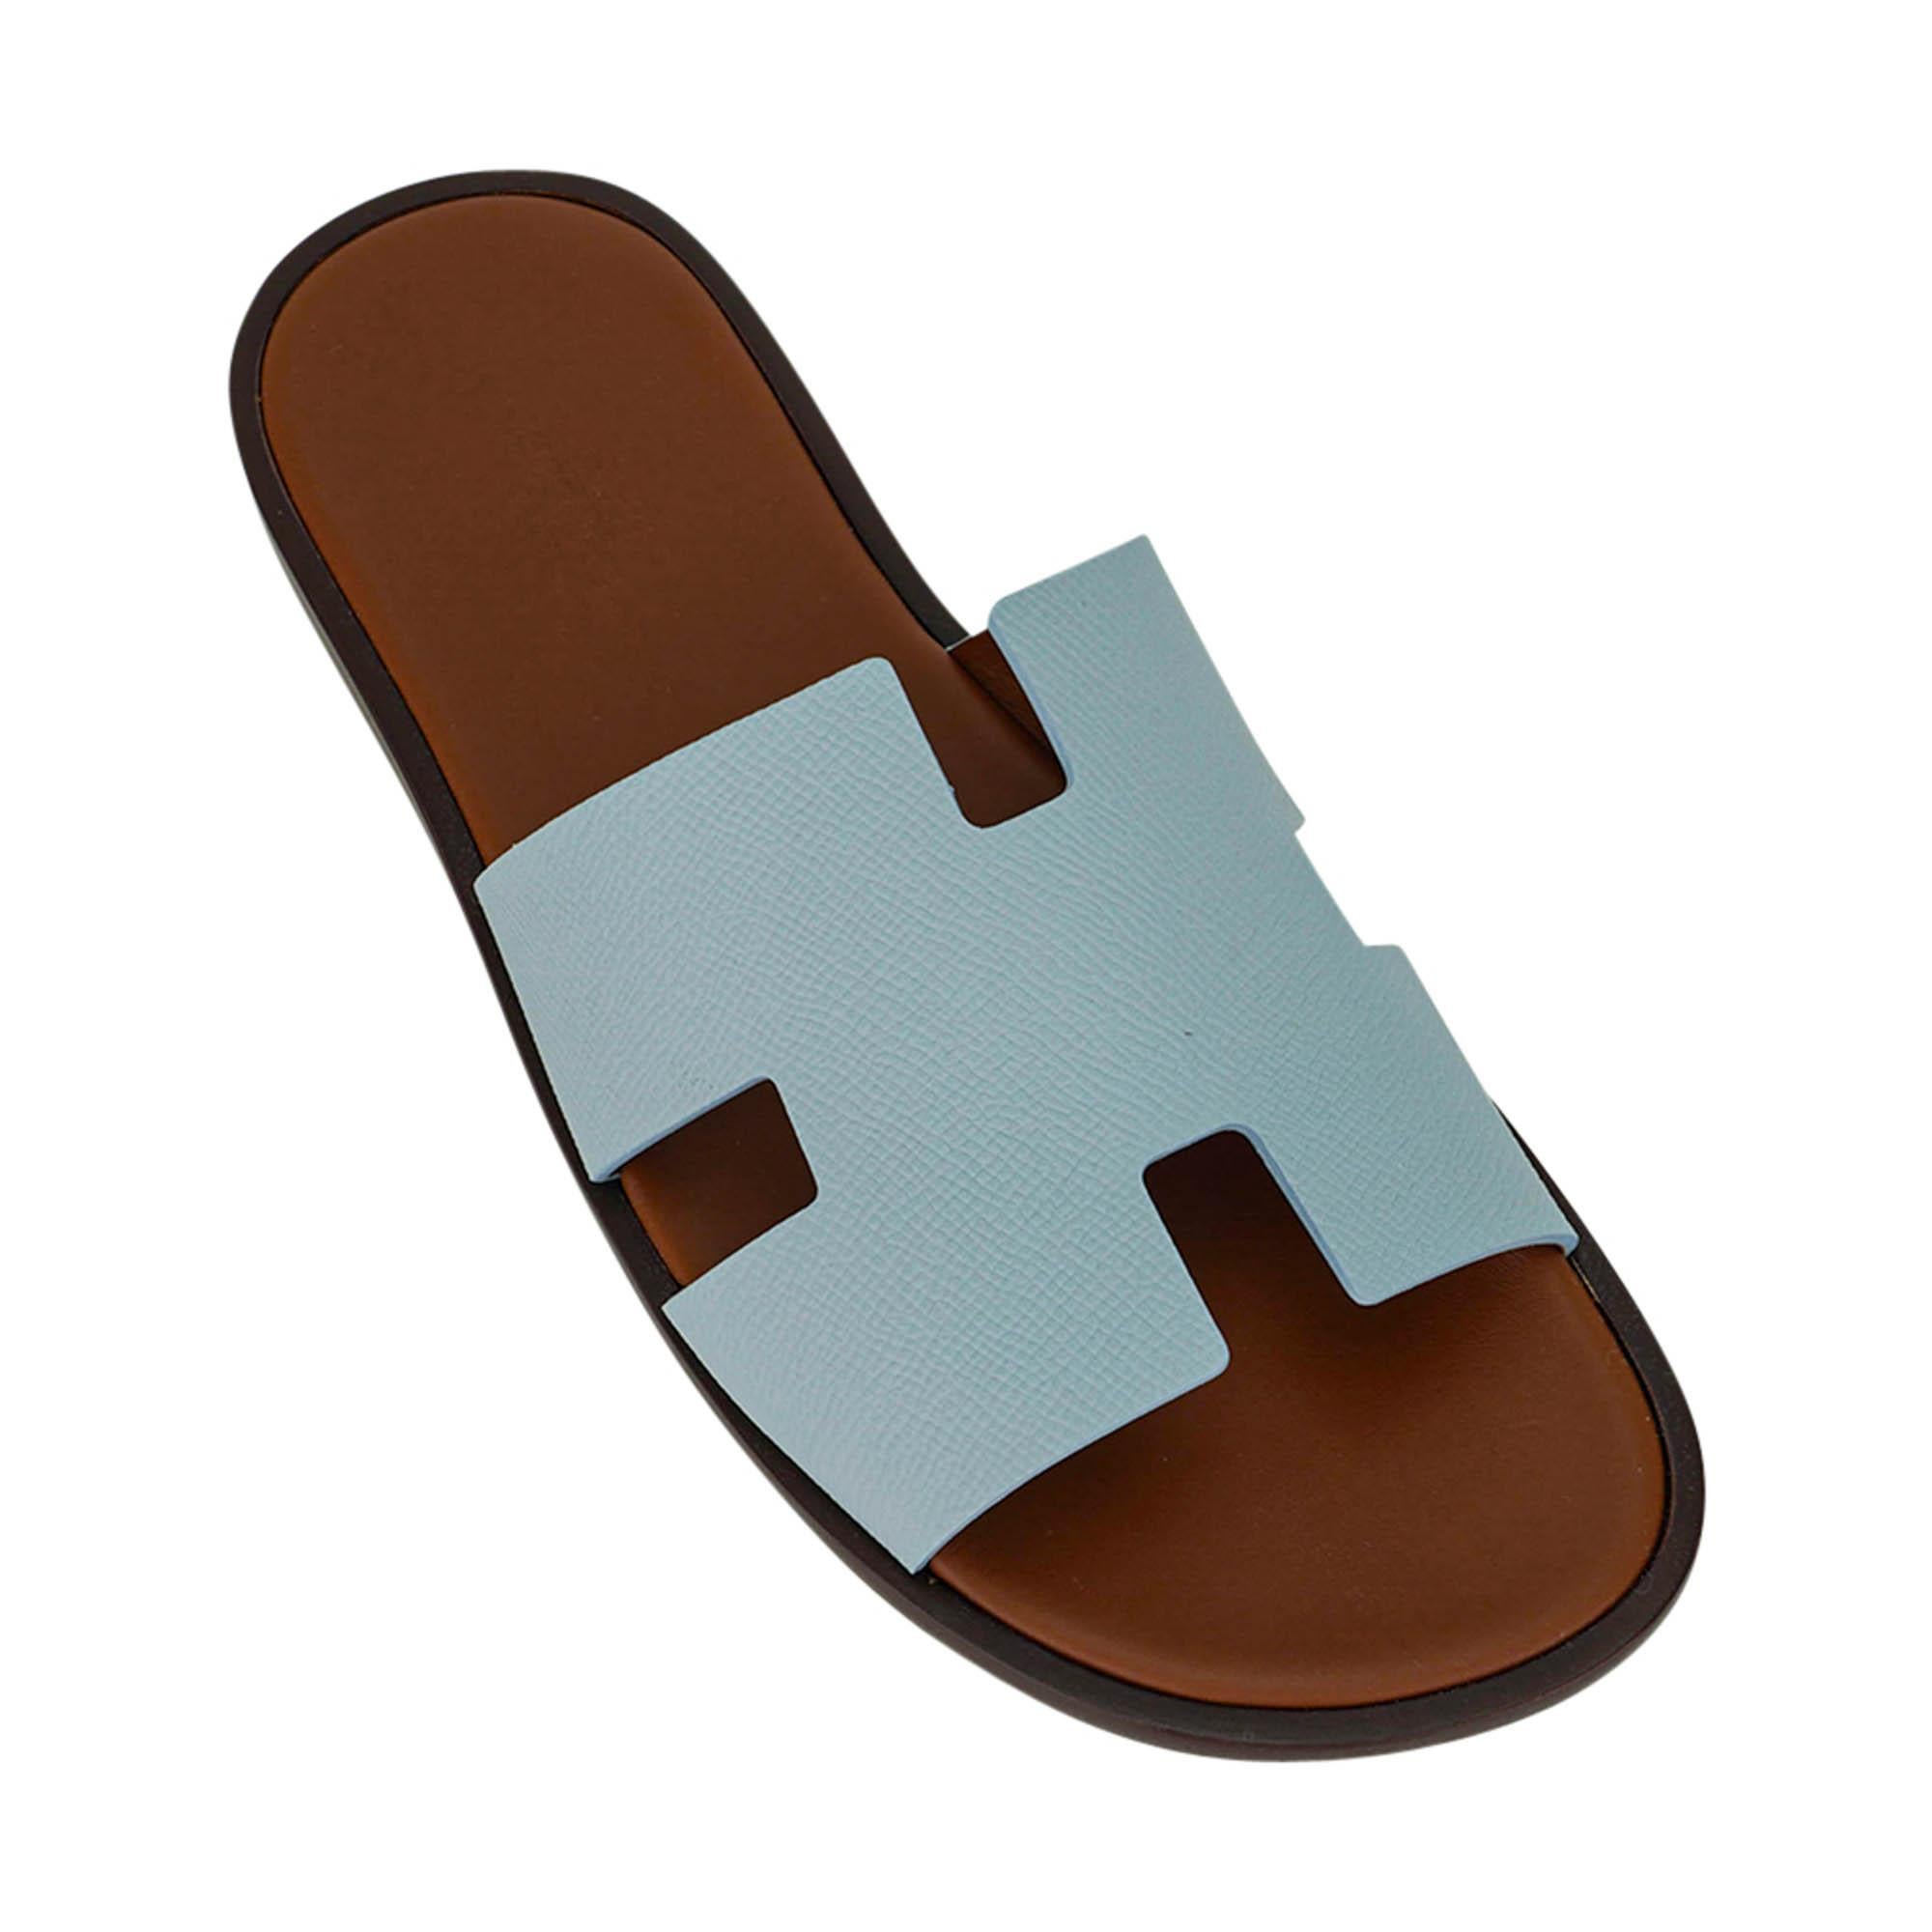 Mightychic offers a pair of Hermes Men's Izmir sandal featured in Vert d'Eau with Naturel insole leather lining.
The iconic H cutout over the top of the foot in Epsom leather.
Sophisticated colours in a silhouette that works for every